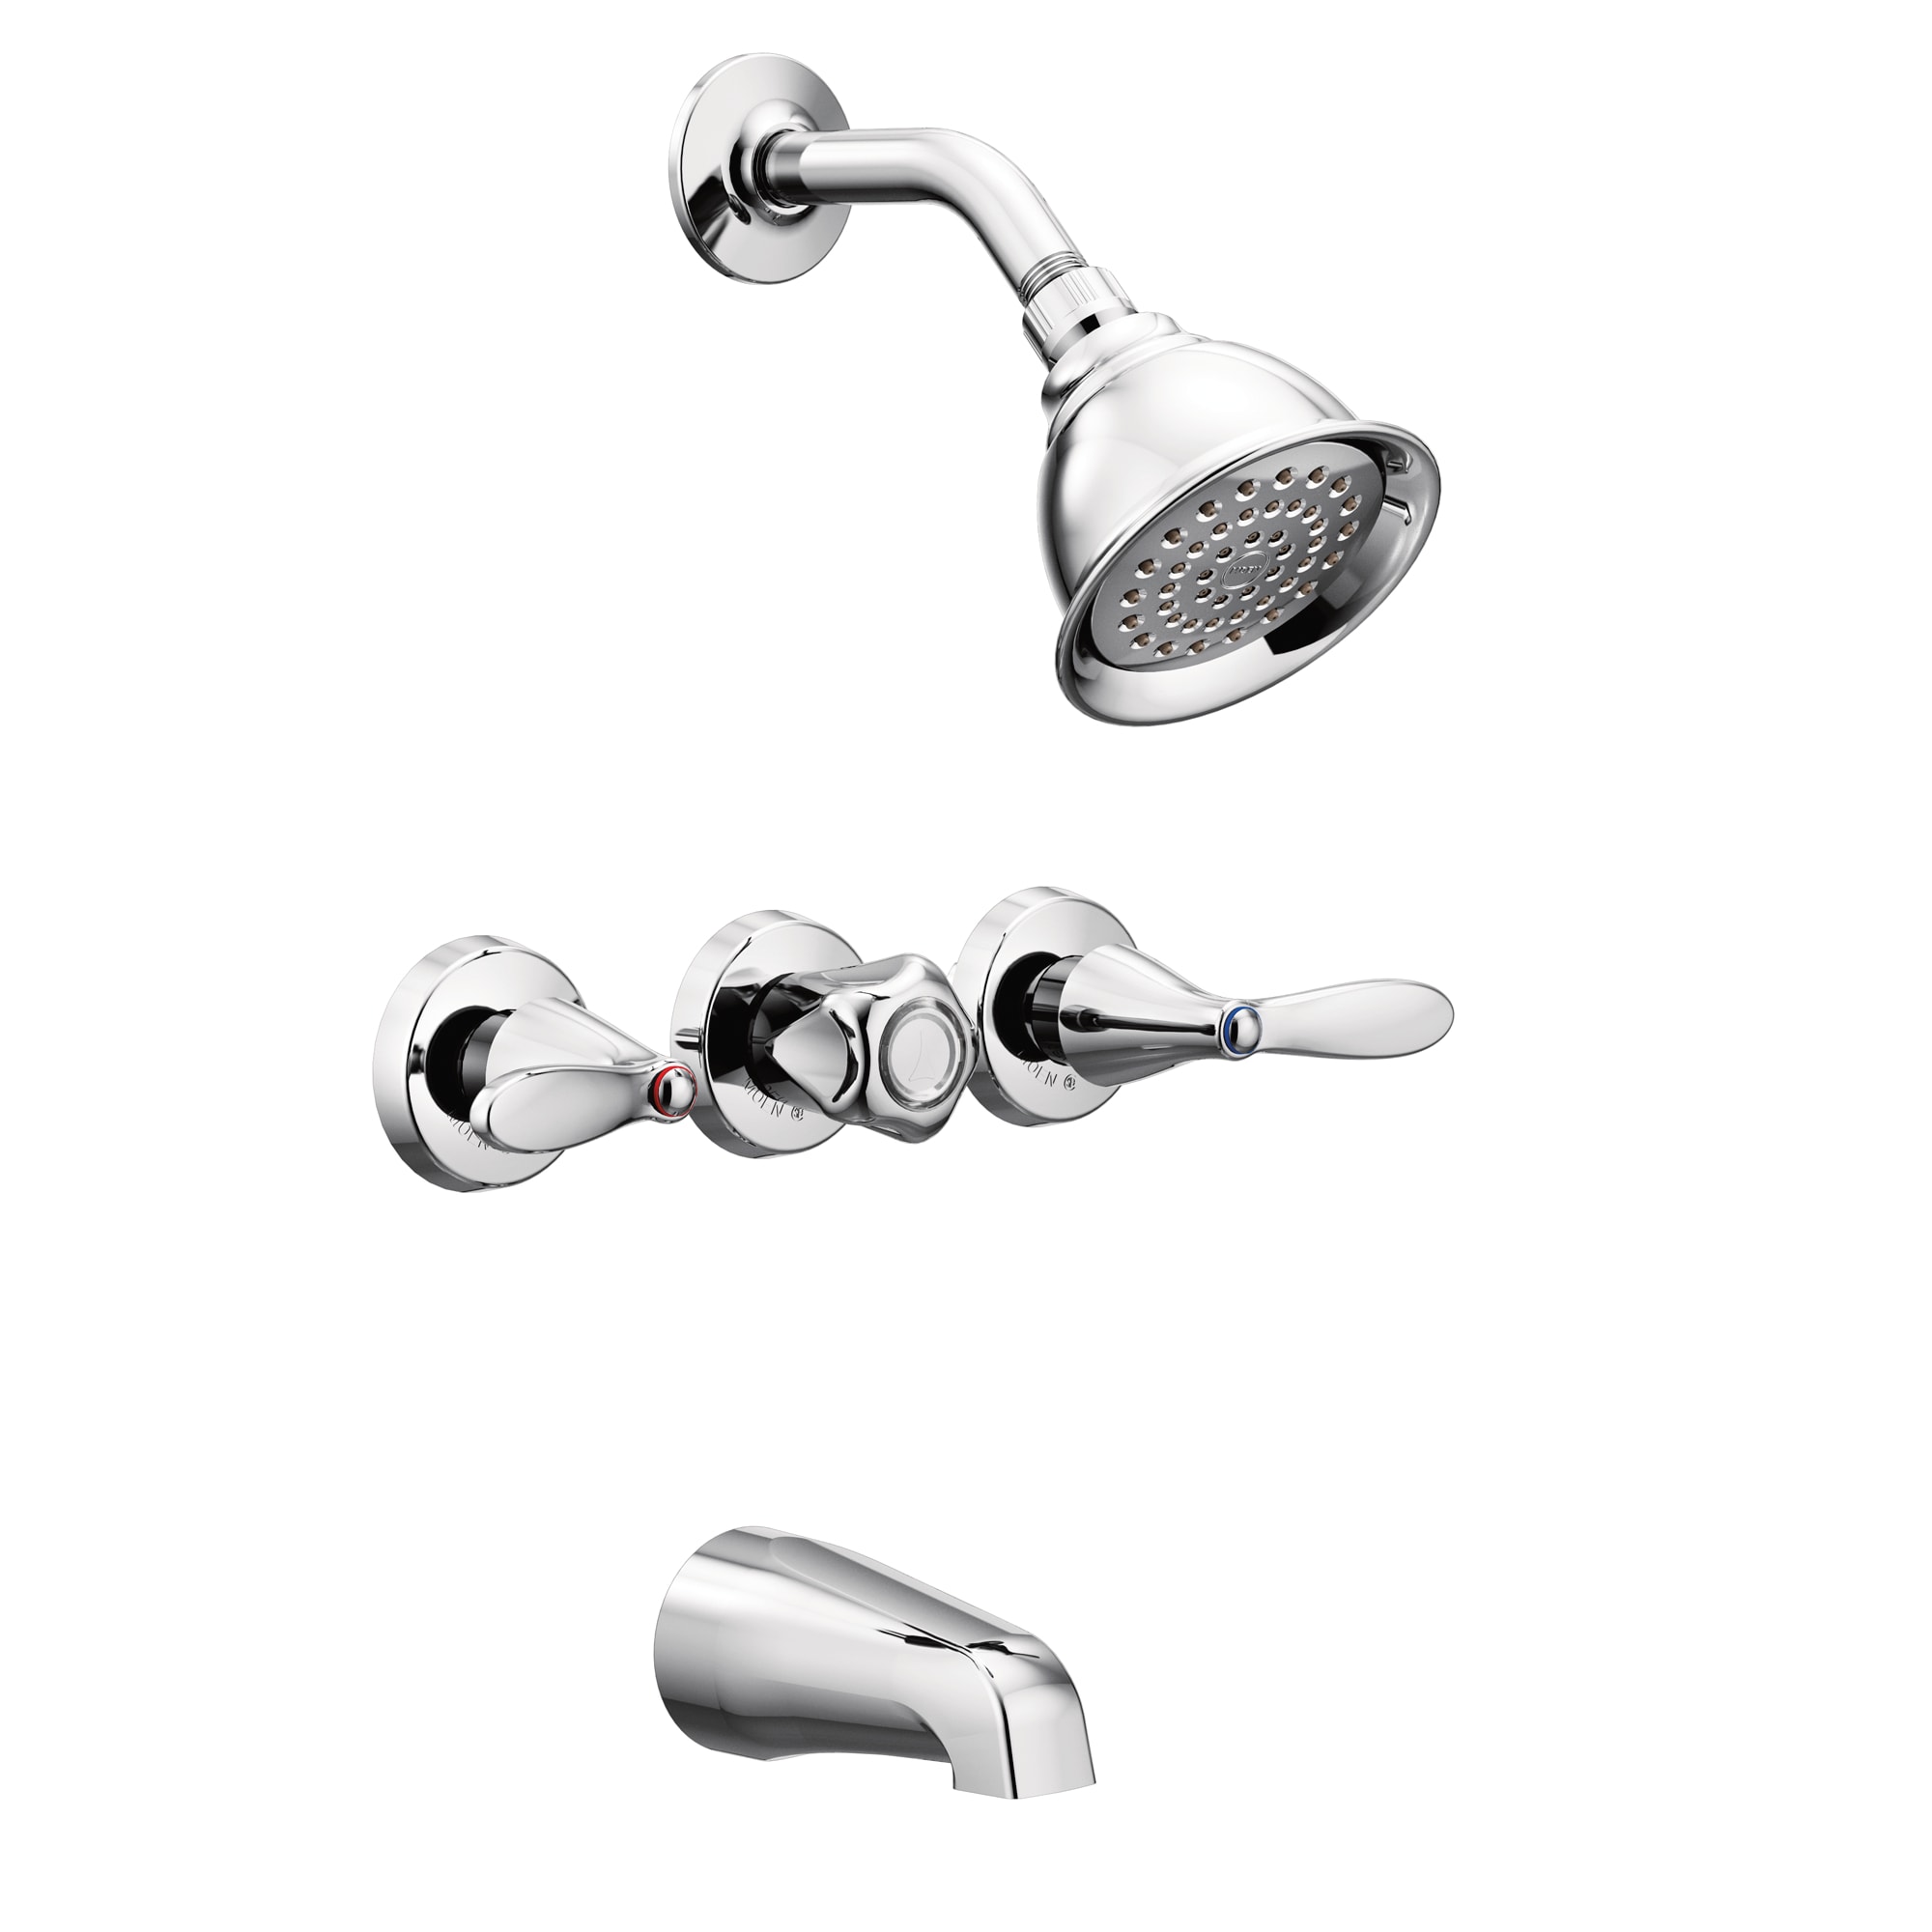 Moen Adler Chrome 3 Handle Bathtub And, How To Replace A Three Handle Bathtub Faucet